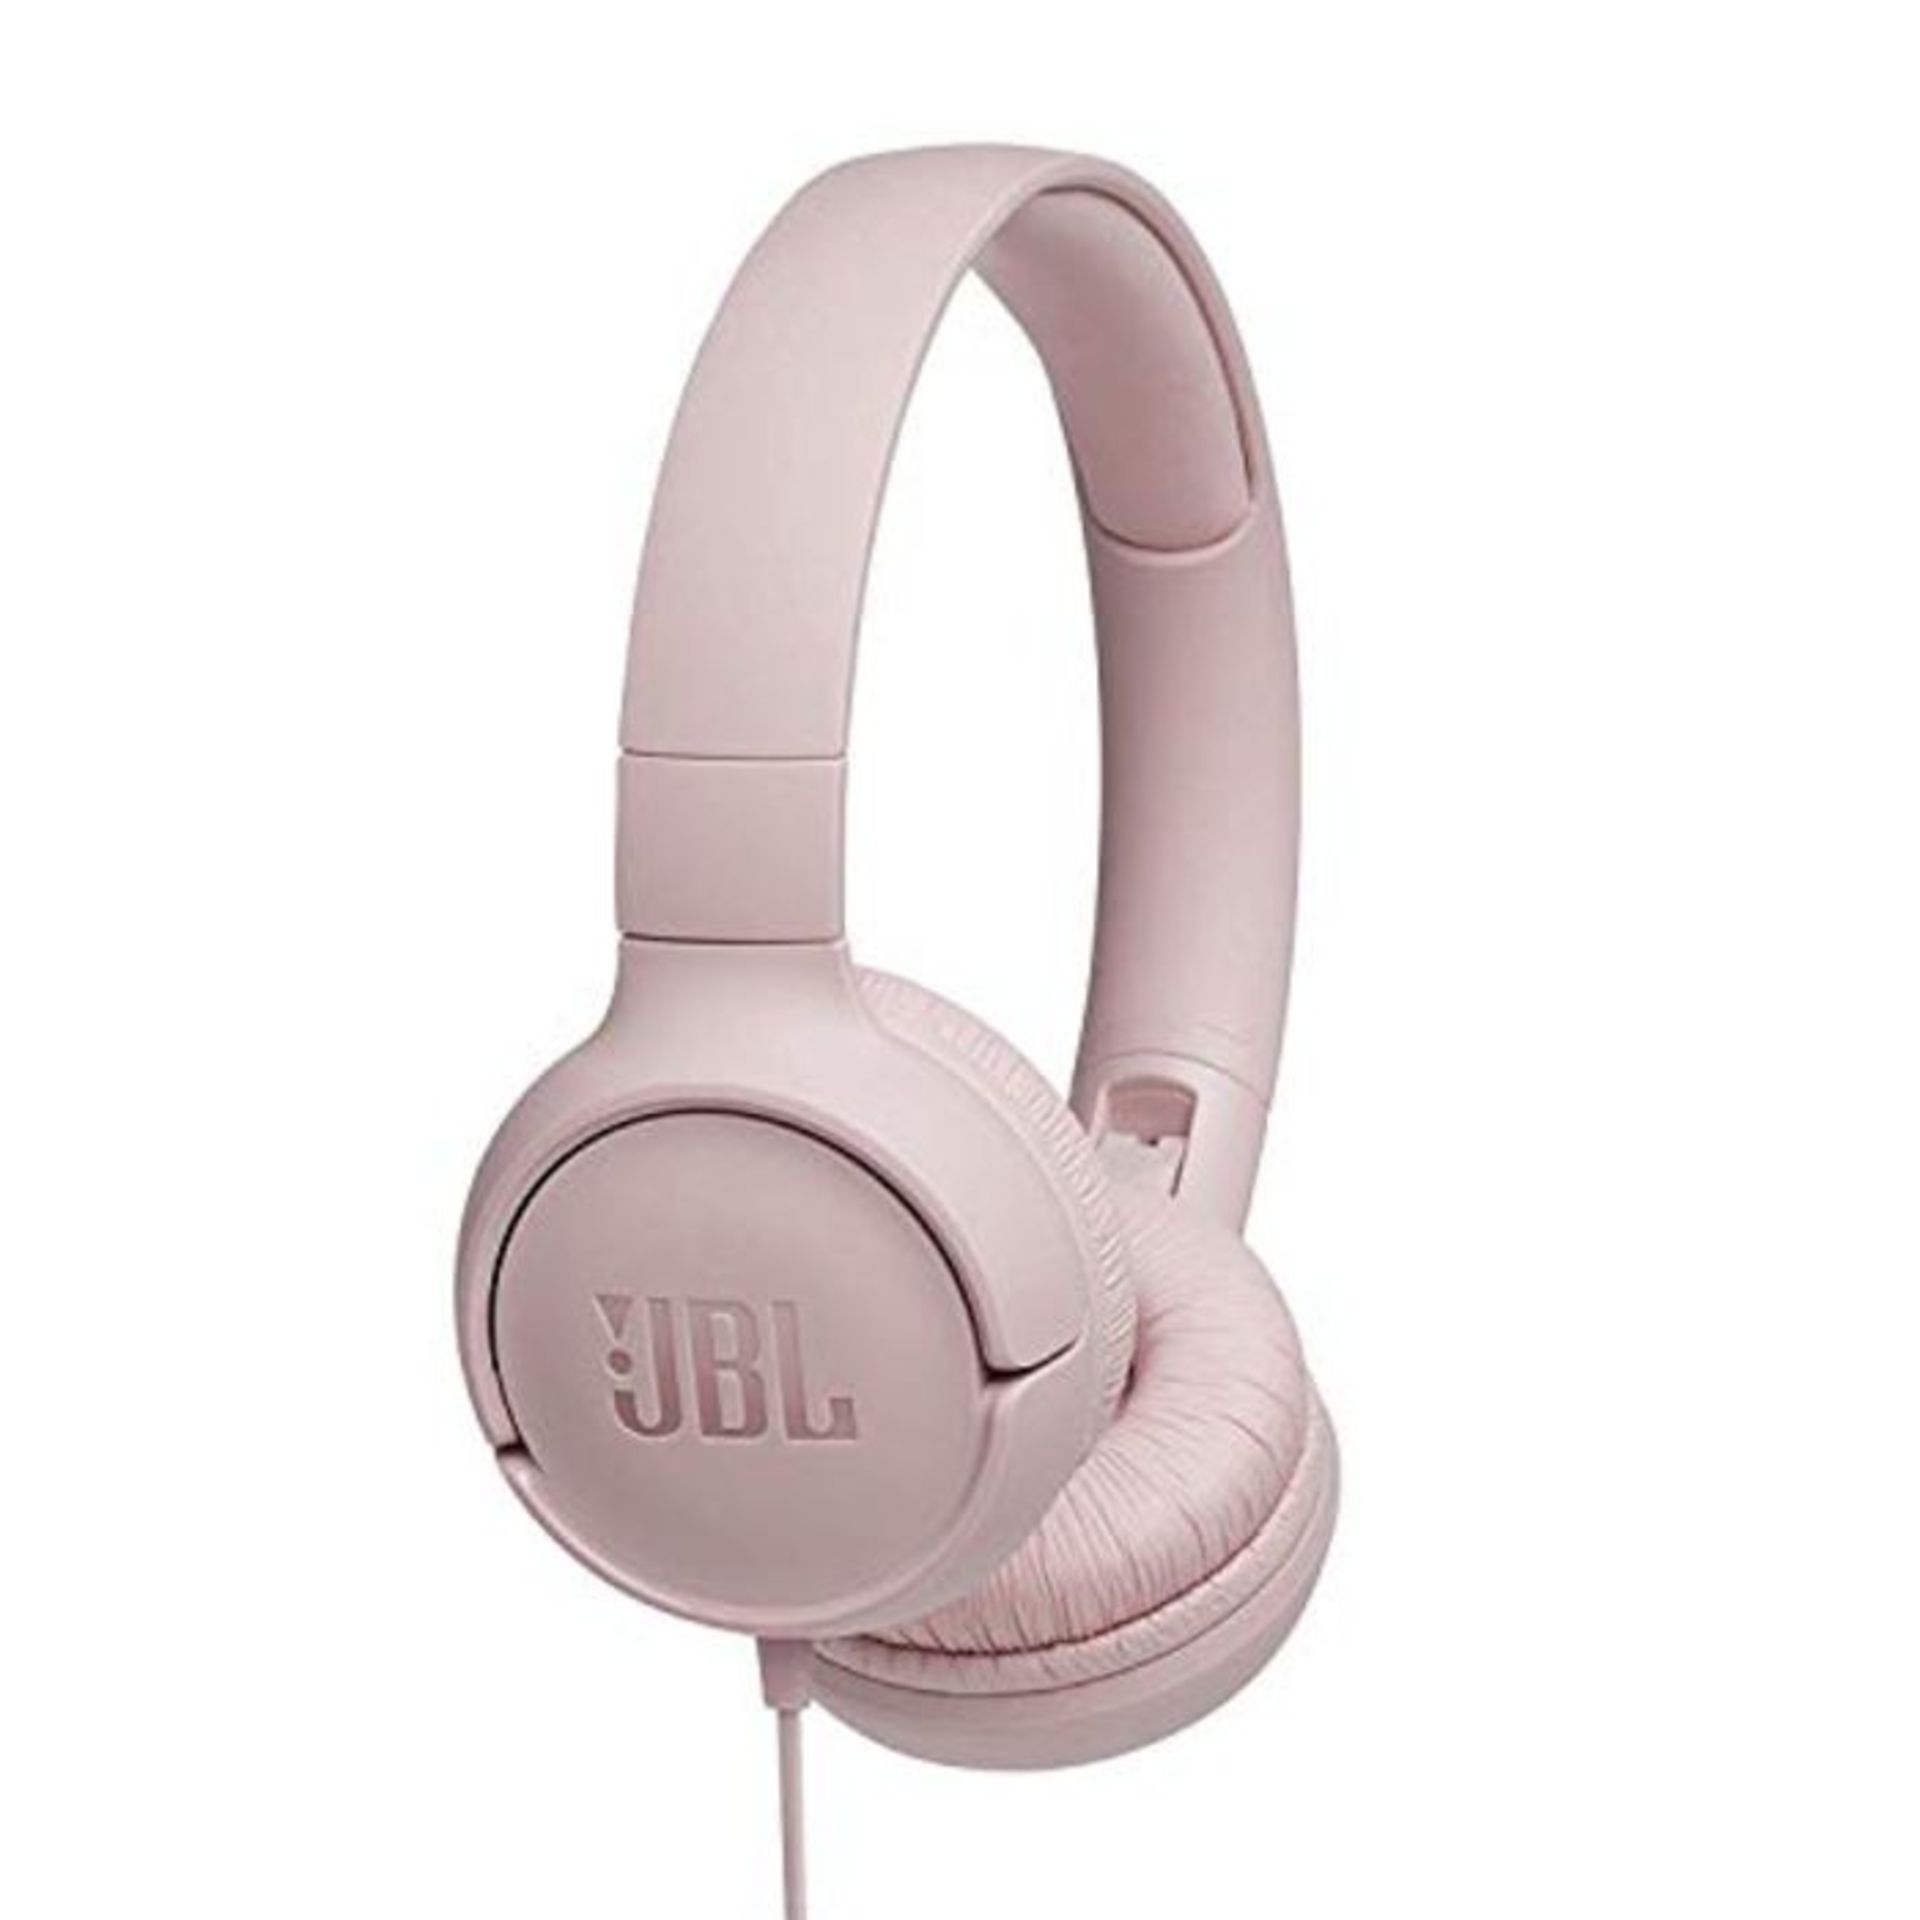 JBL T500 in Pink - Over Ear Lightweight / Foldable Headphones with Pure Bass Sound - 1